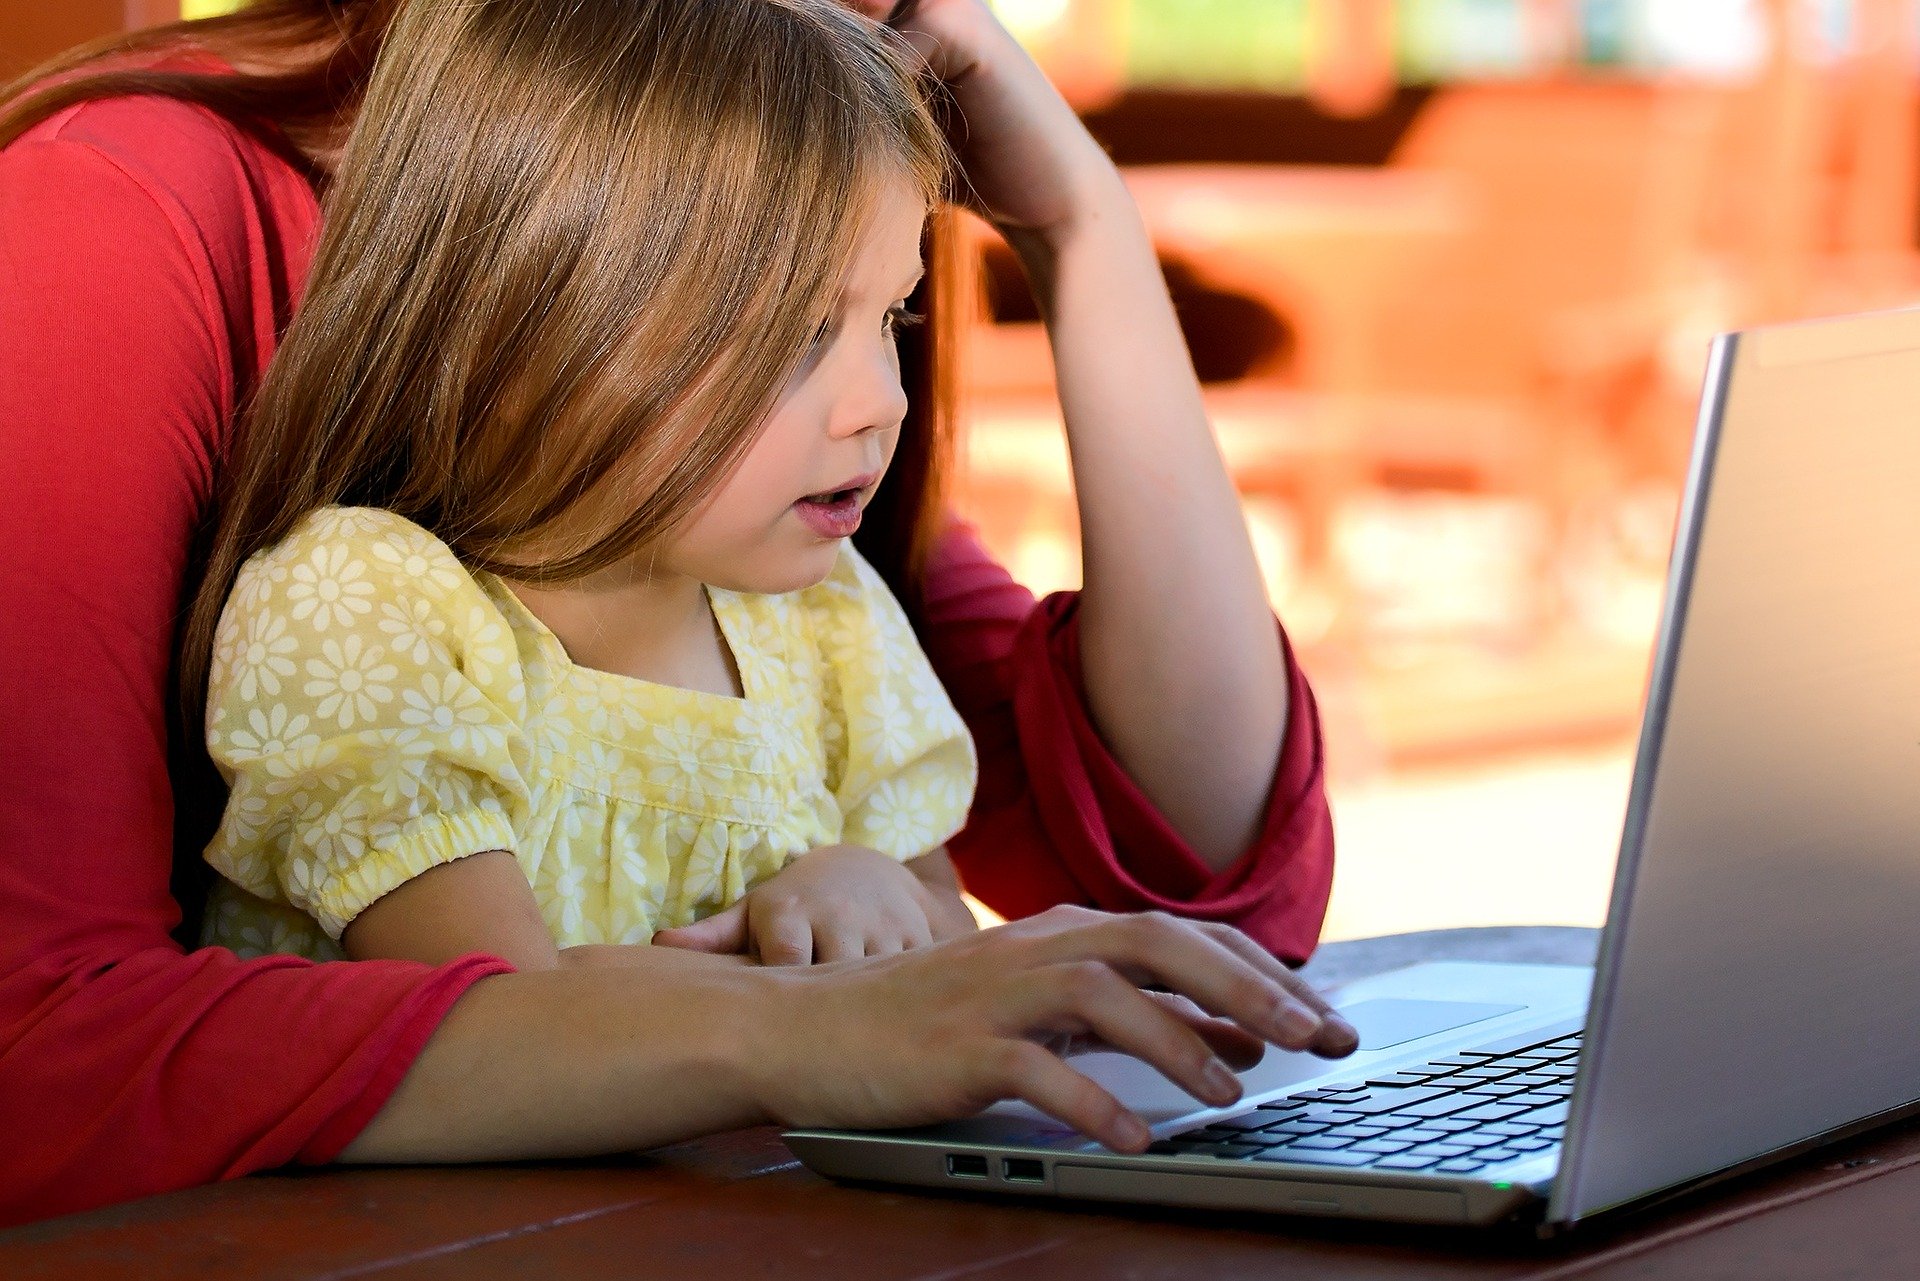 parent and child sit together in front of a laptop screen